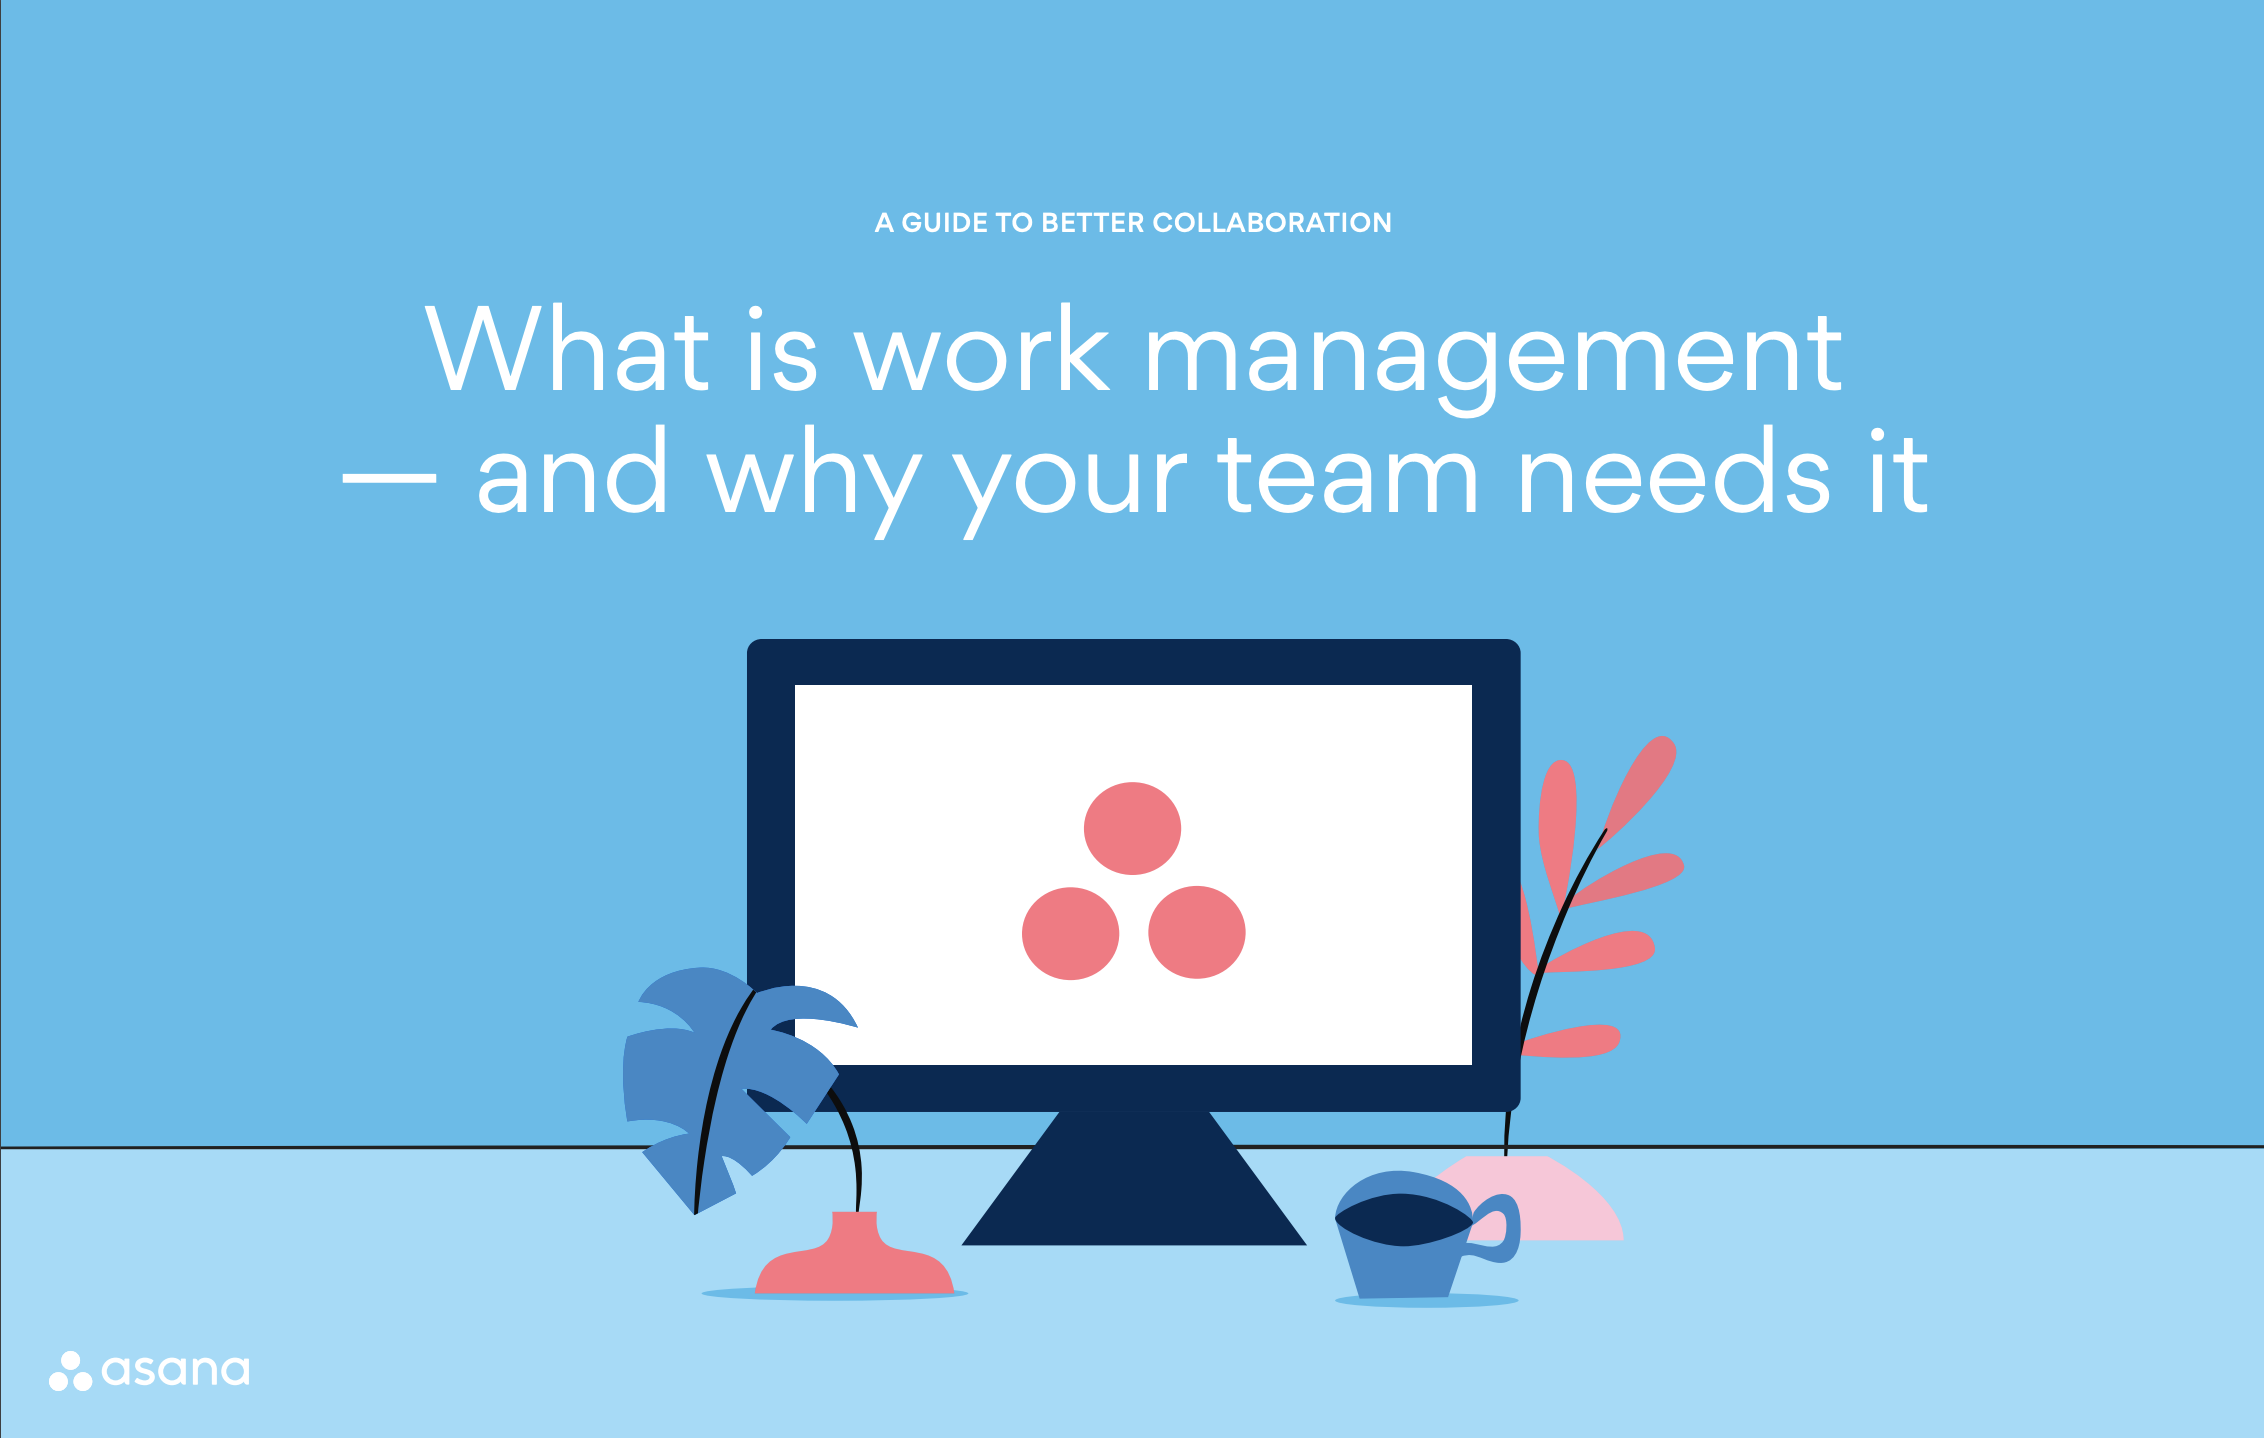 Asana - What is work management and why your team needs it Ebook - Cover